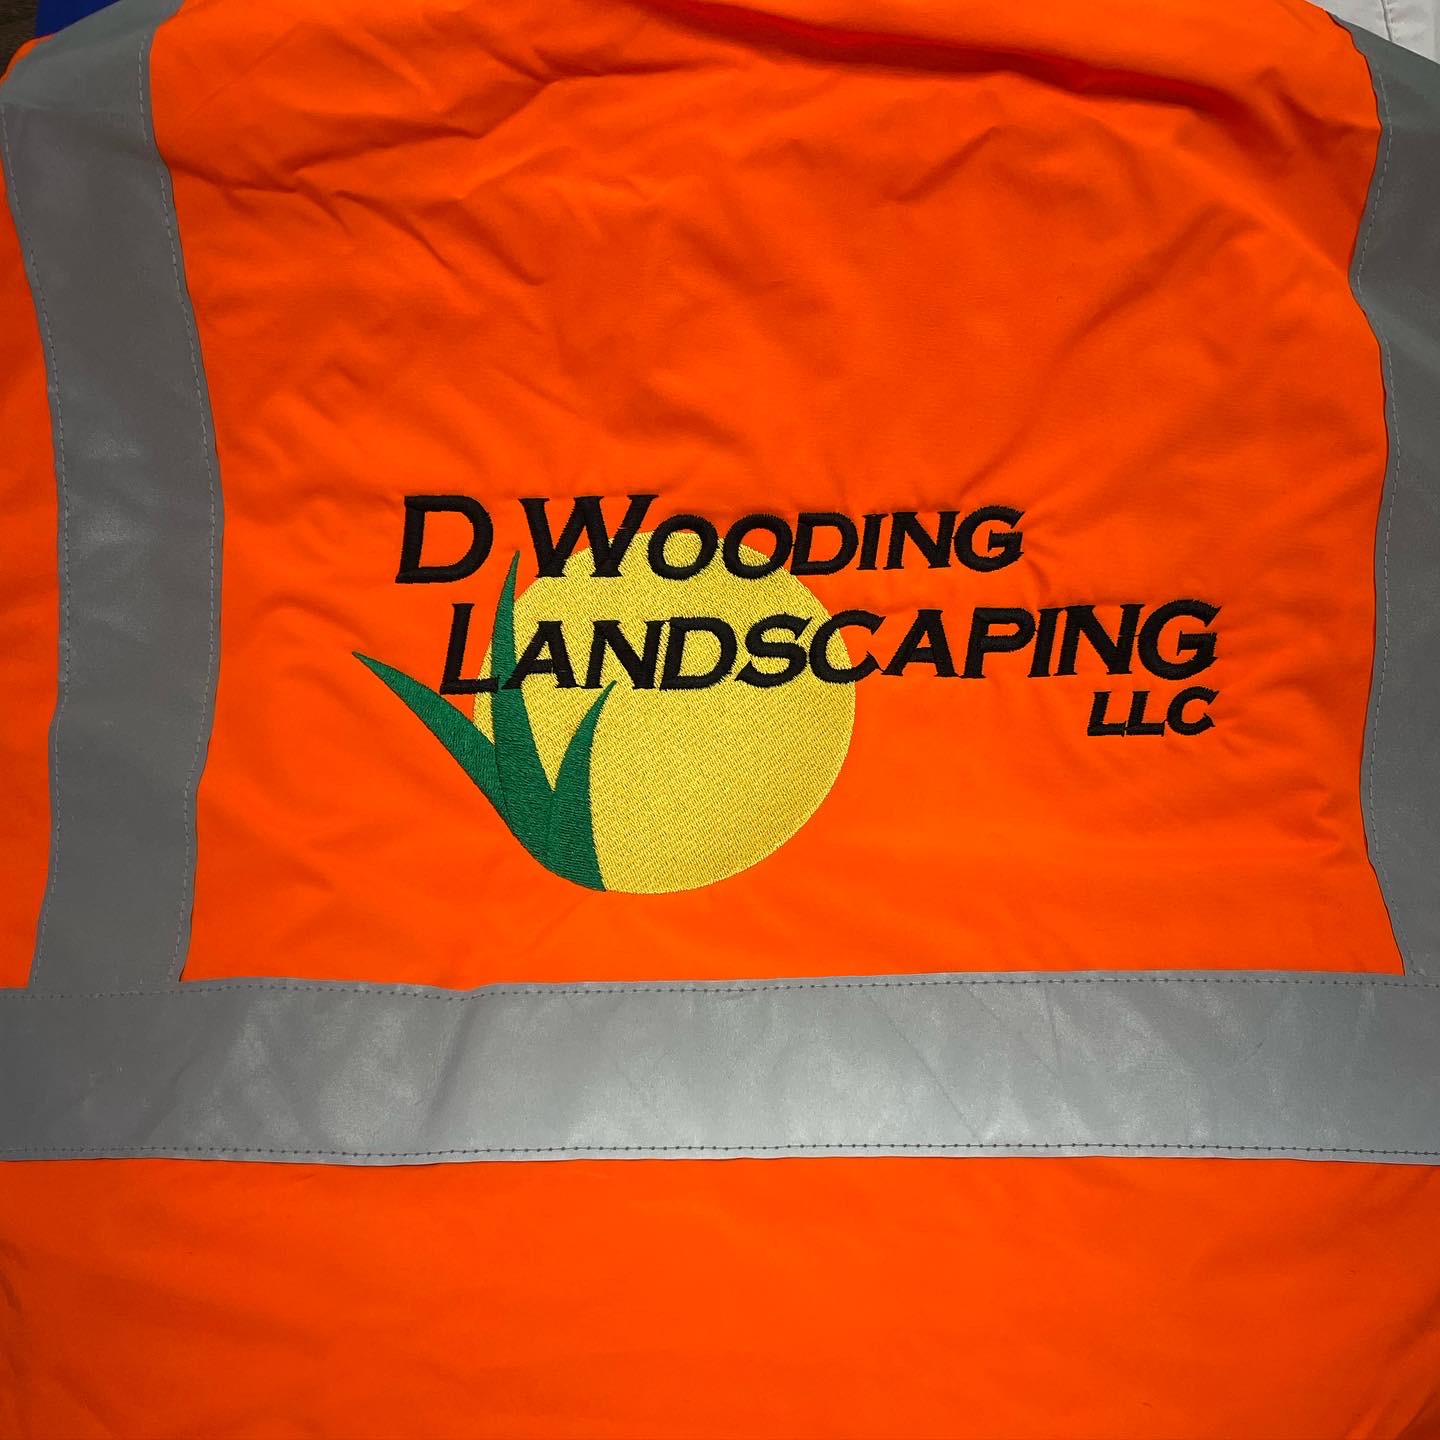 D Wooding Landscaping LLC Embroidery